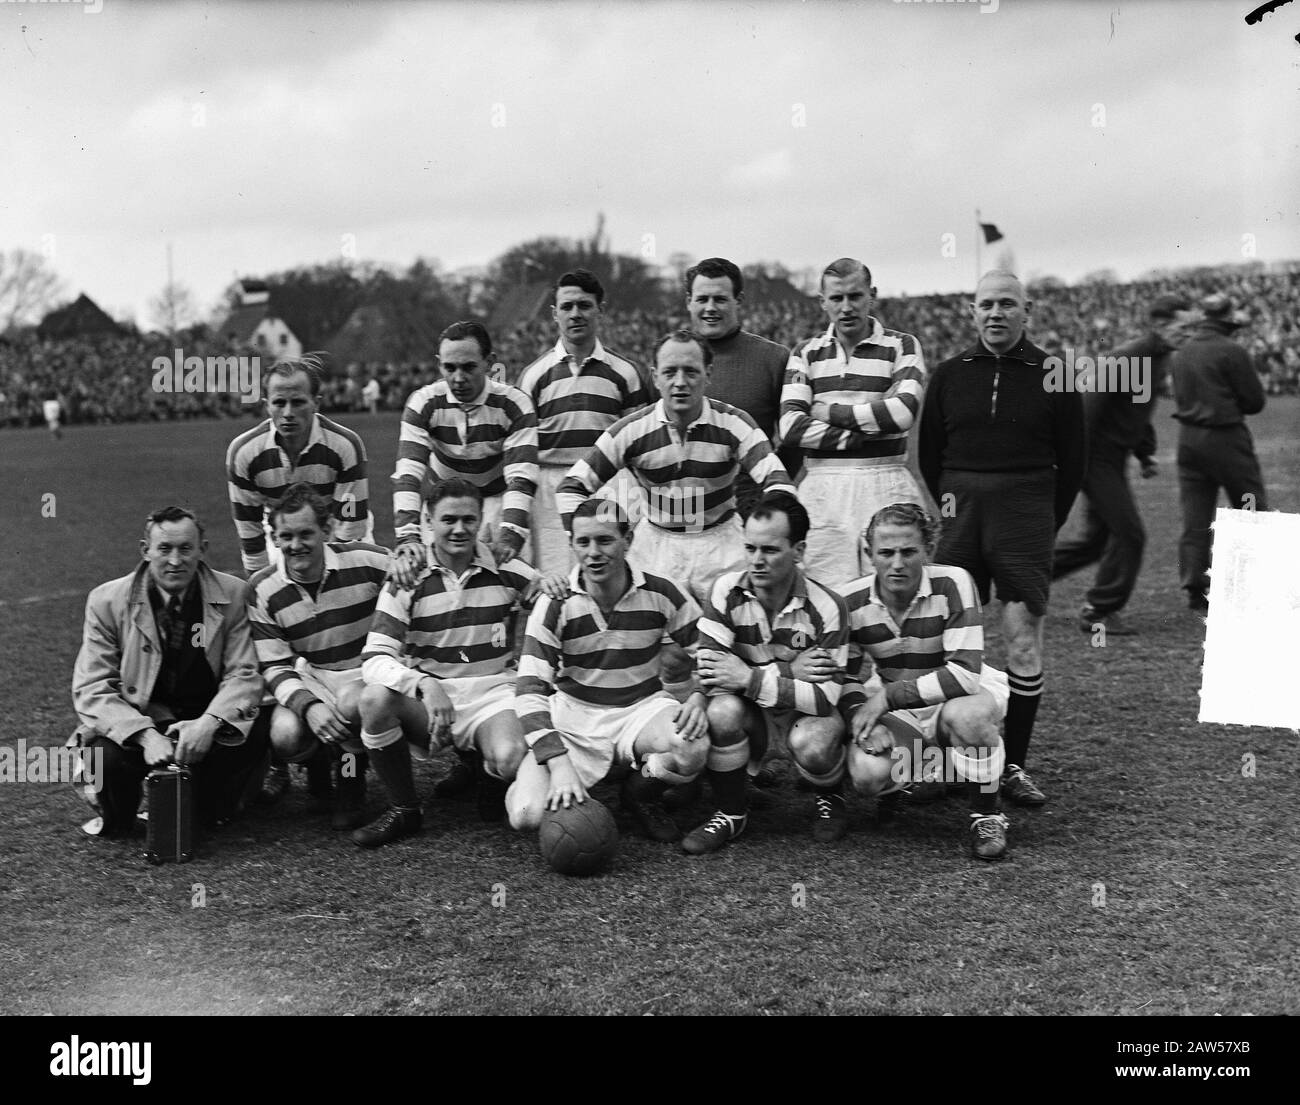 RCH against Blue-White 0-2. Blue-White champion. Team Blue-White Date: April 8, 1951 Location: Heemstede Keywords: teams, group portraits, football, soccer Institution Name: Blue-white Stock Photo